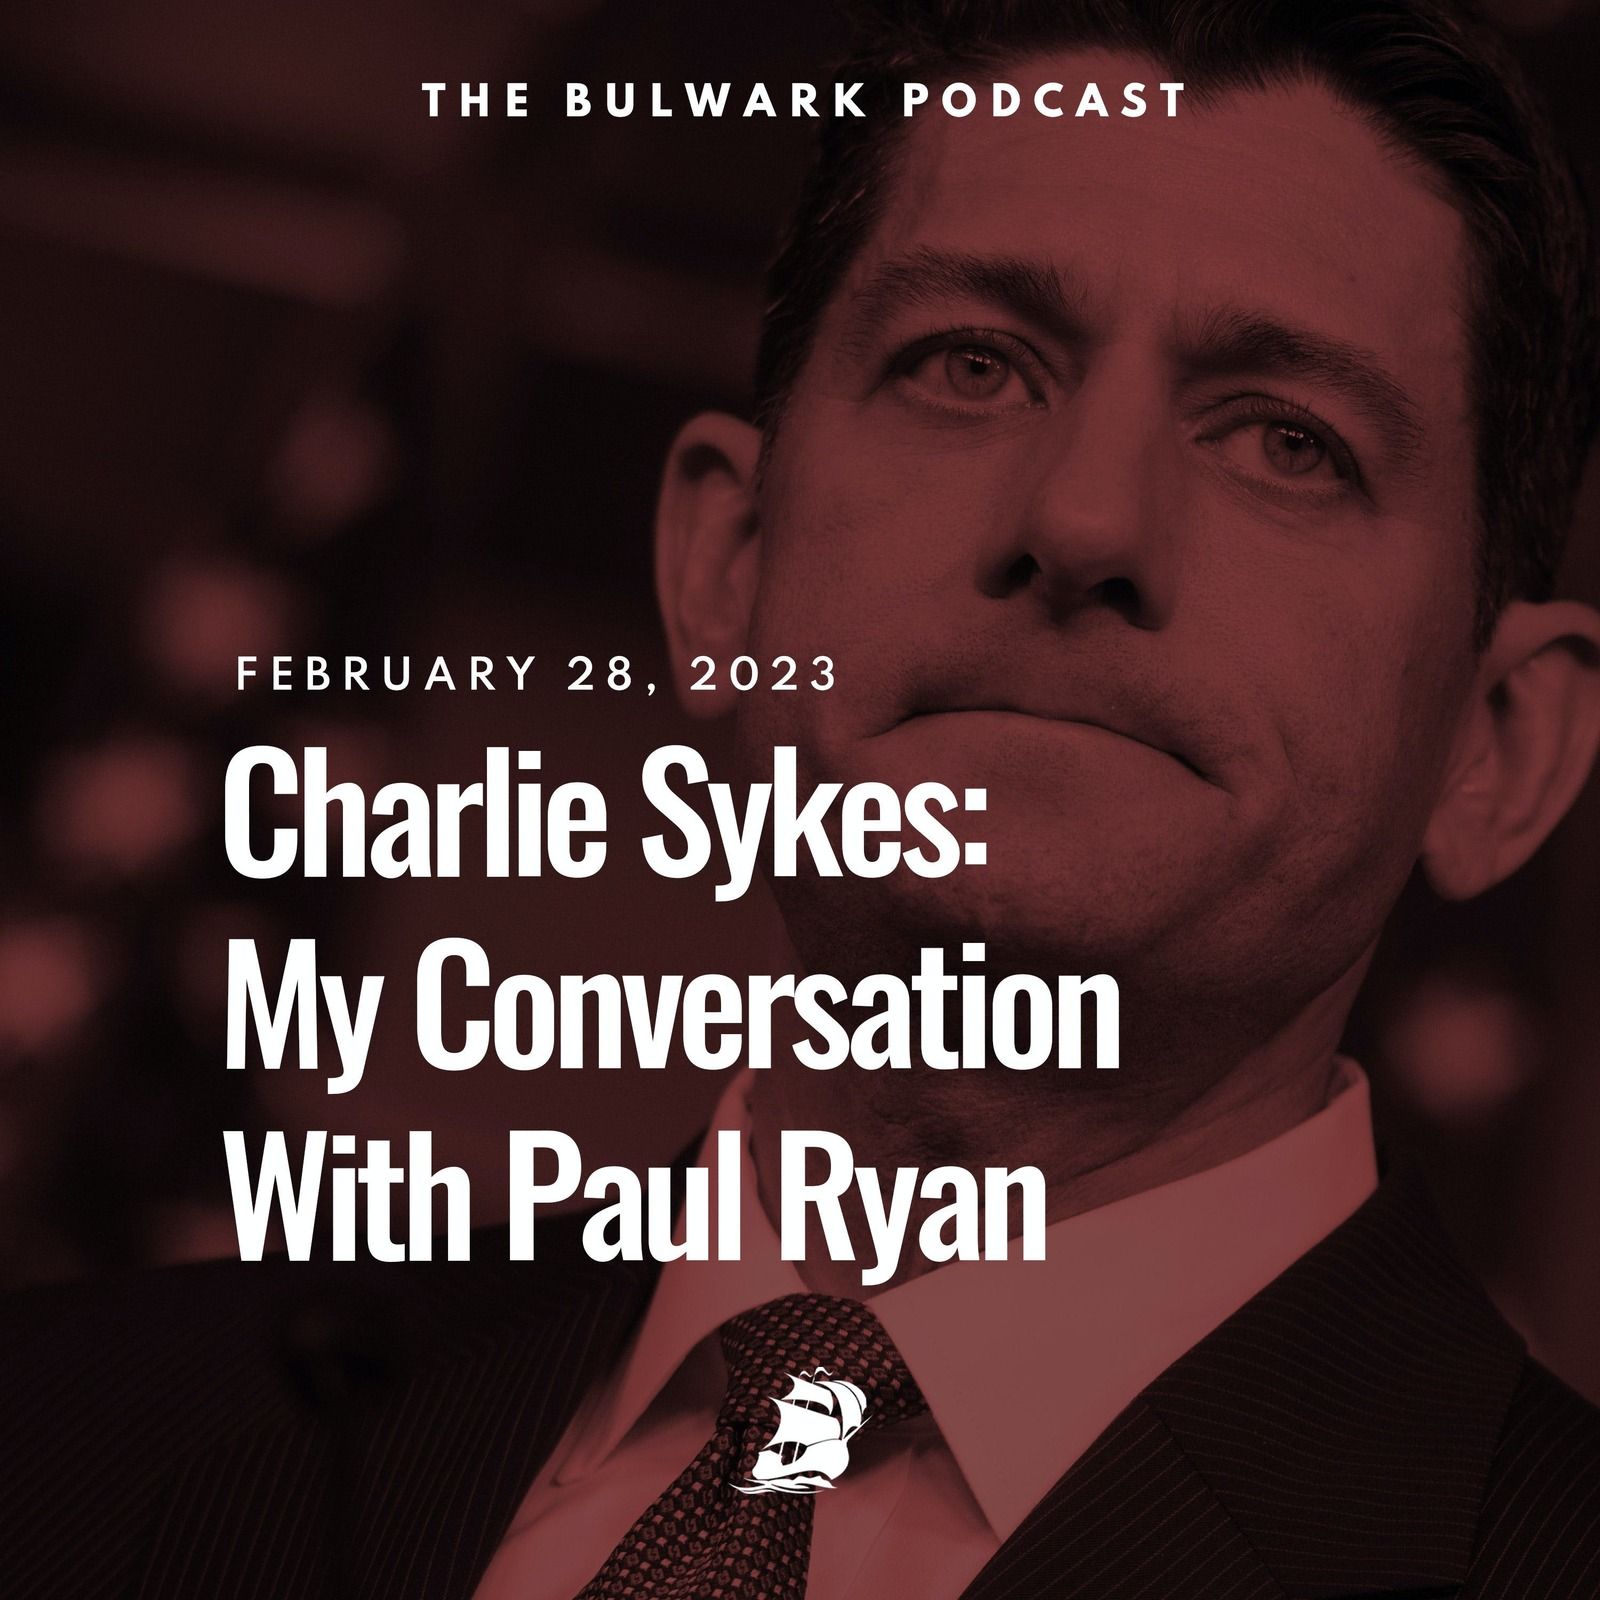 My Conversation With Paul Ryan by The Bulwark Podcast